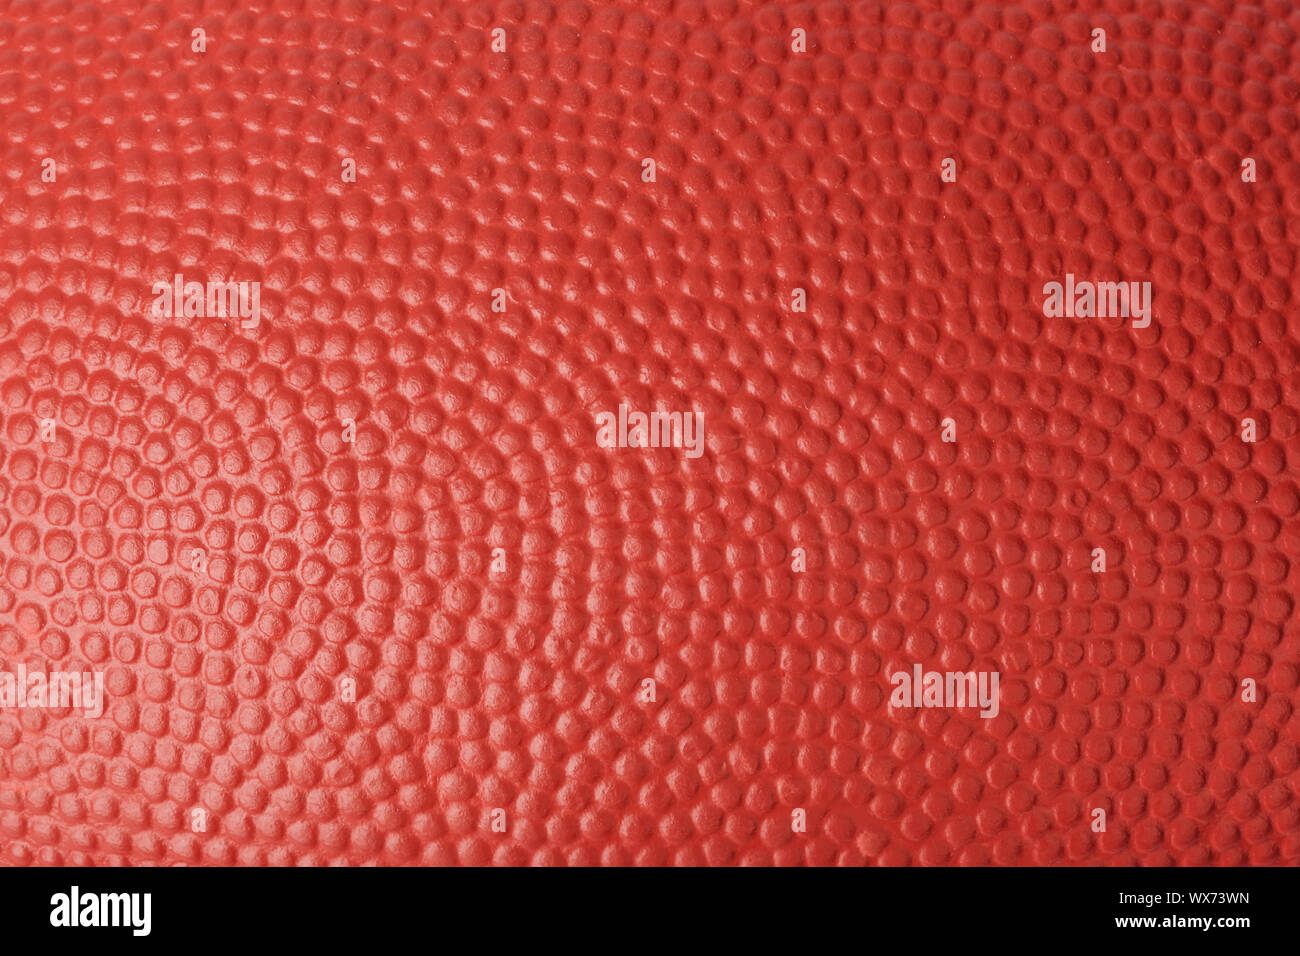 Texture of rugby ball Stock Photo - Alamy